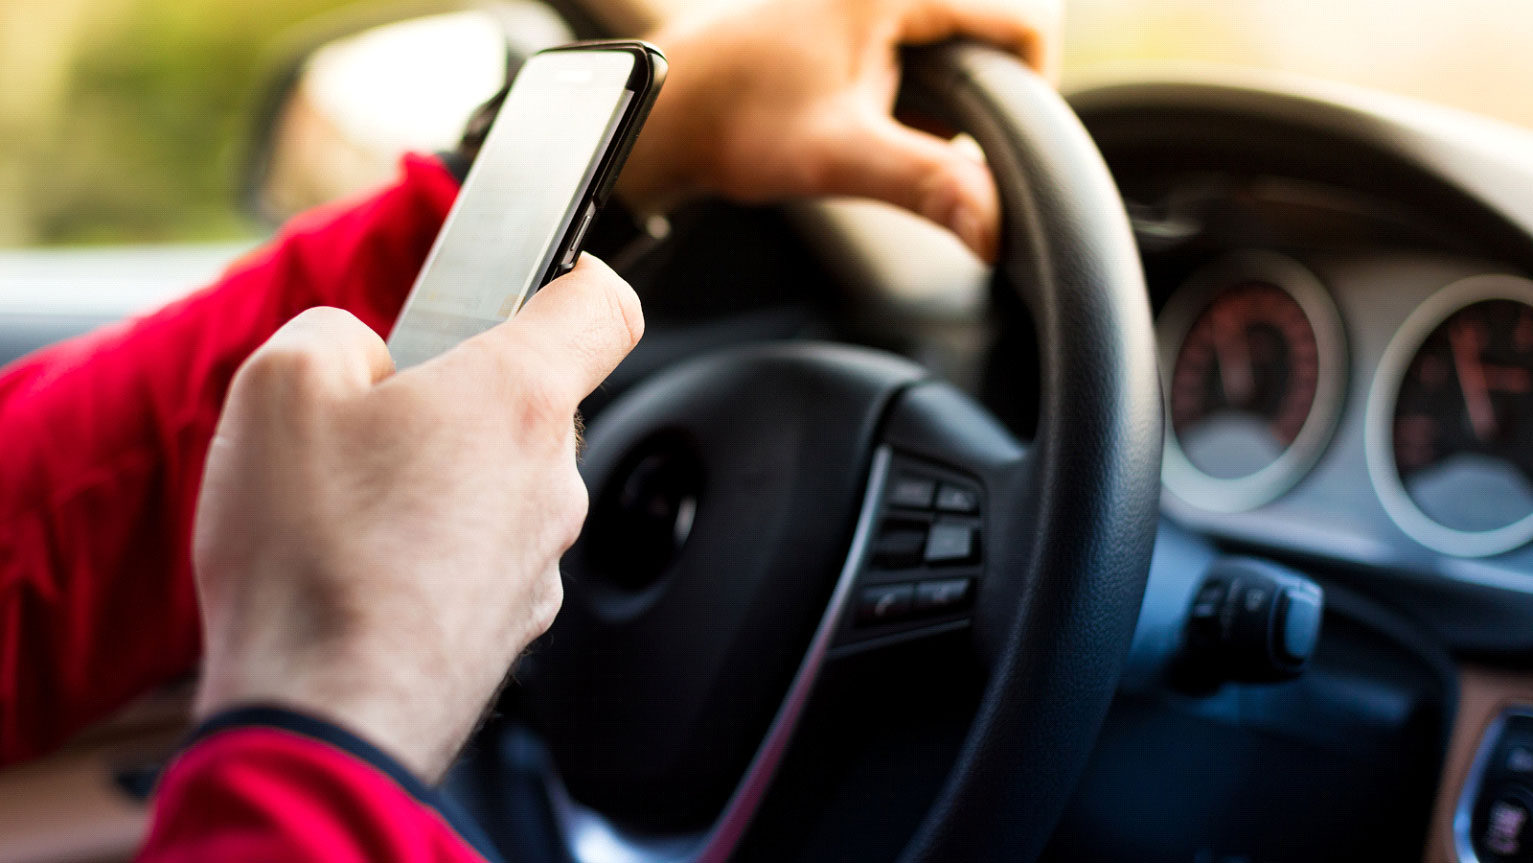 What should I do if I was hit by a driver who was texting?